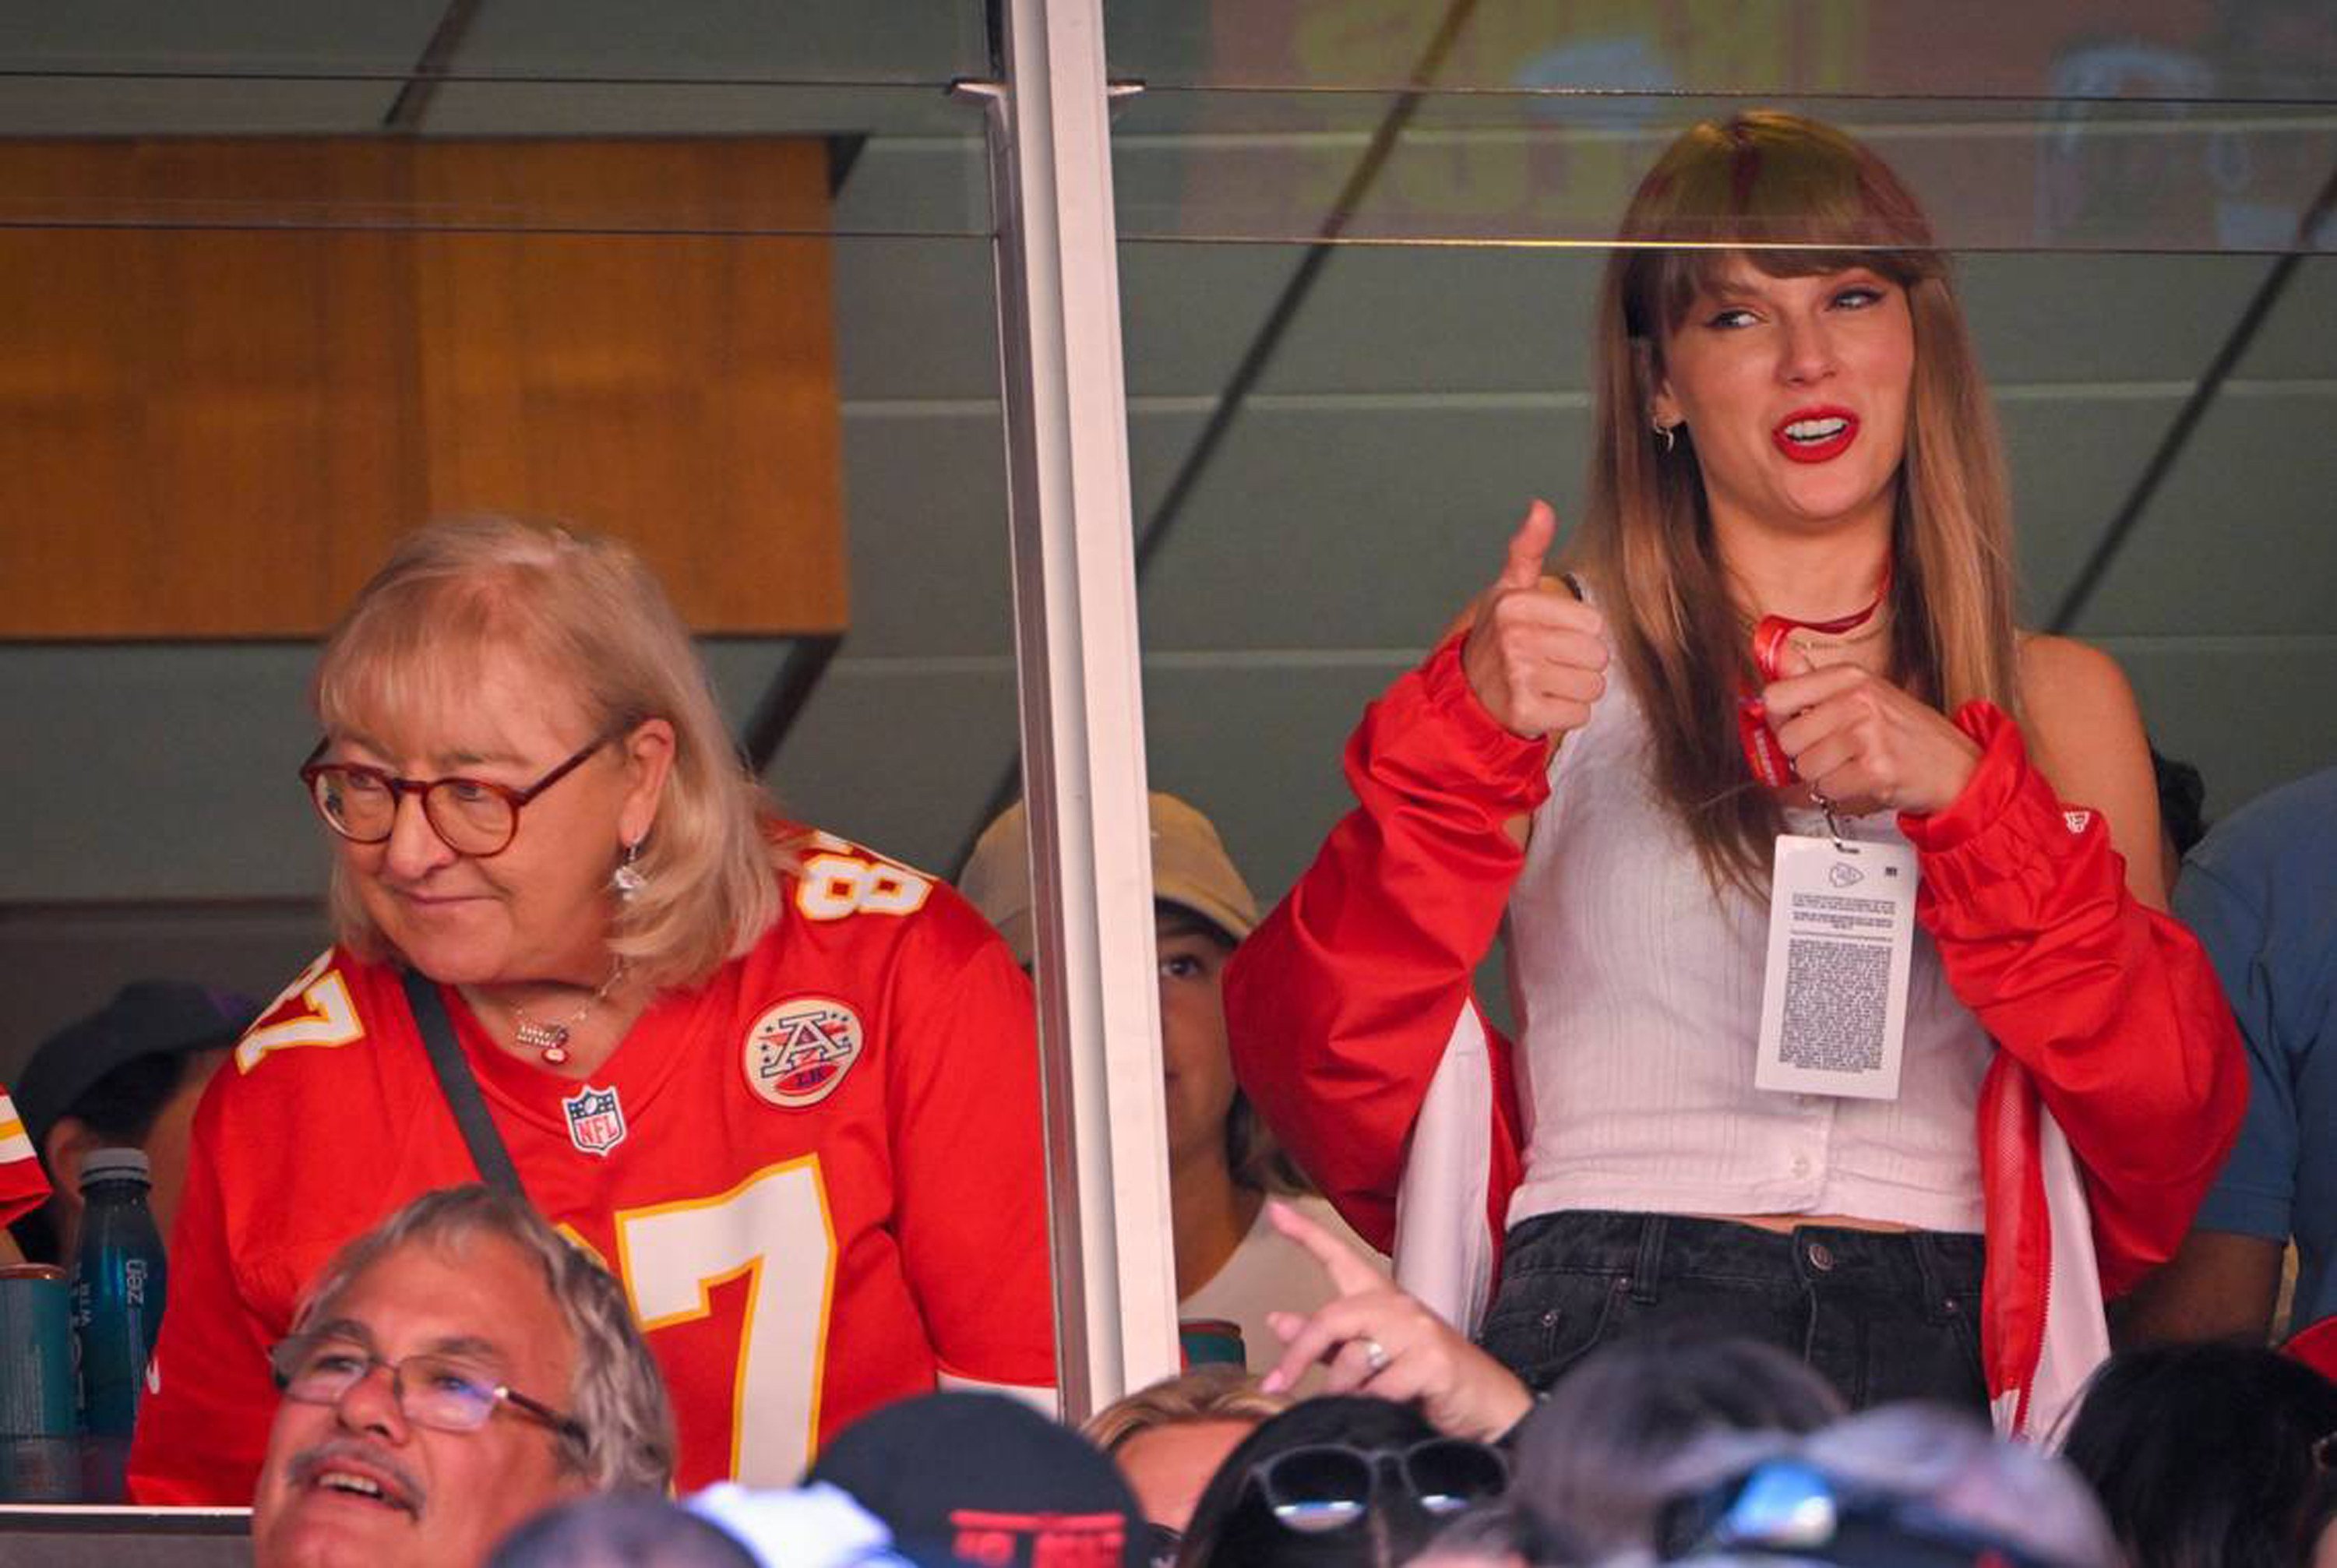 Donna Kelce (left), mother of the Kansas City Chiefs tight end Travis Kelce, watched the game with pop superstar Taylor Swift (right) in September 2023. Photo: Kansas City Star/TNS